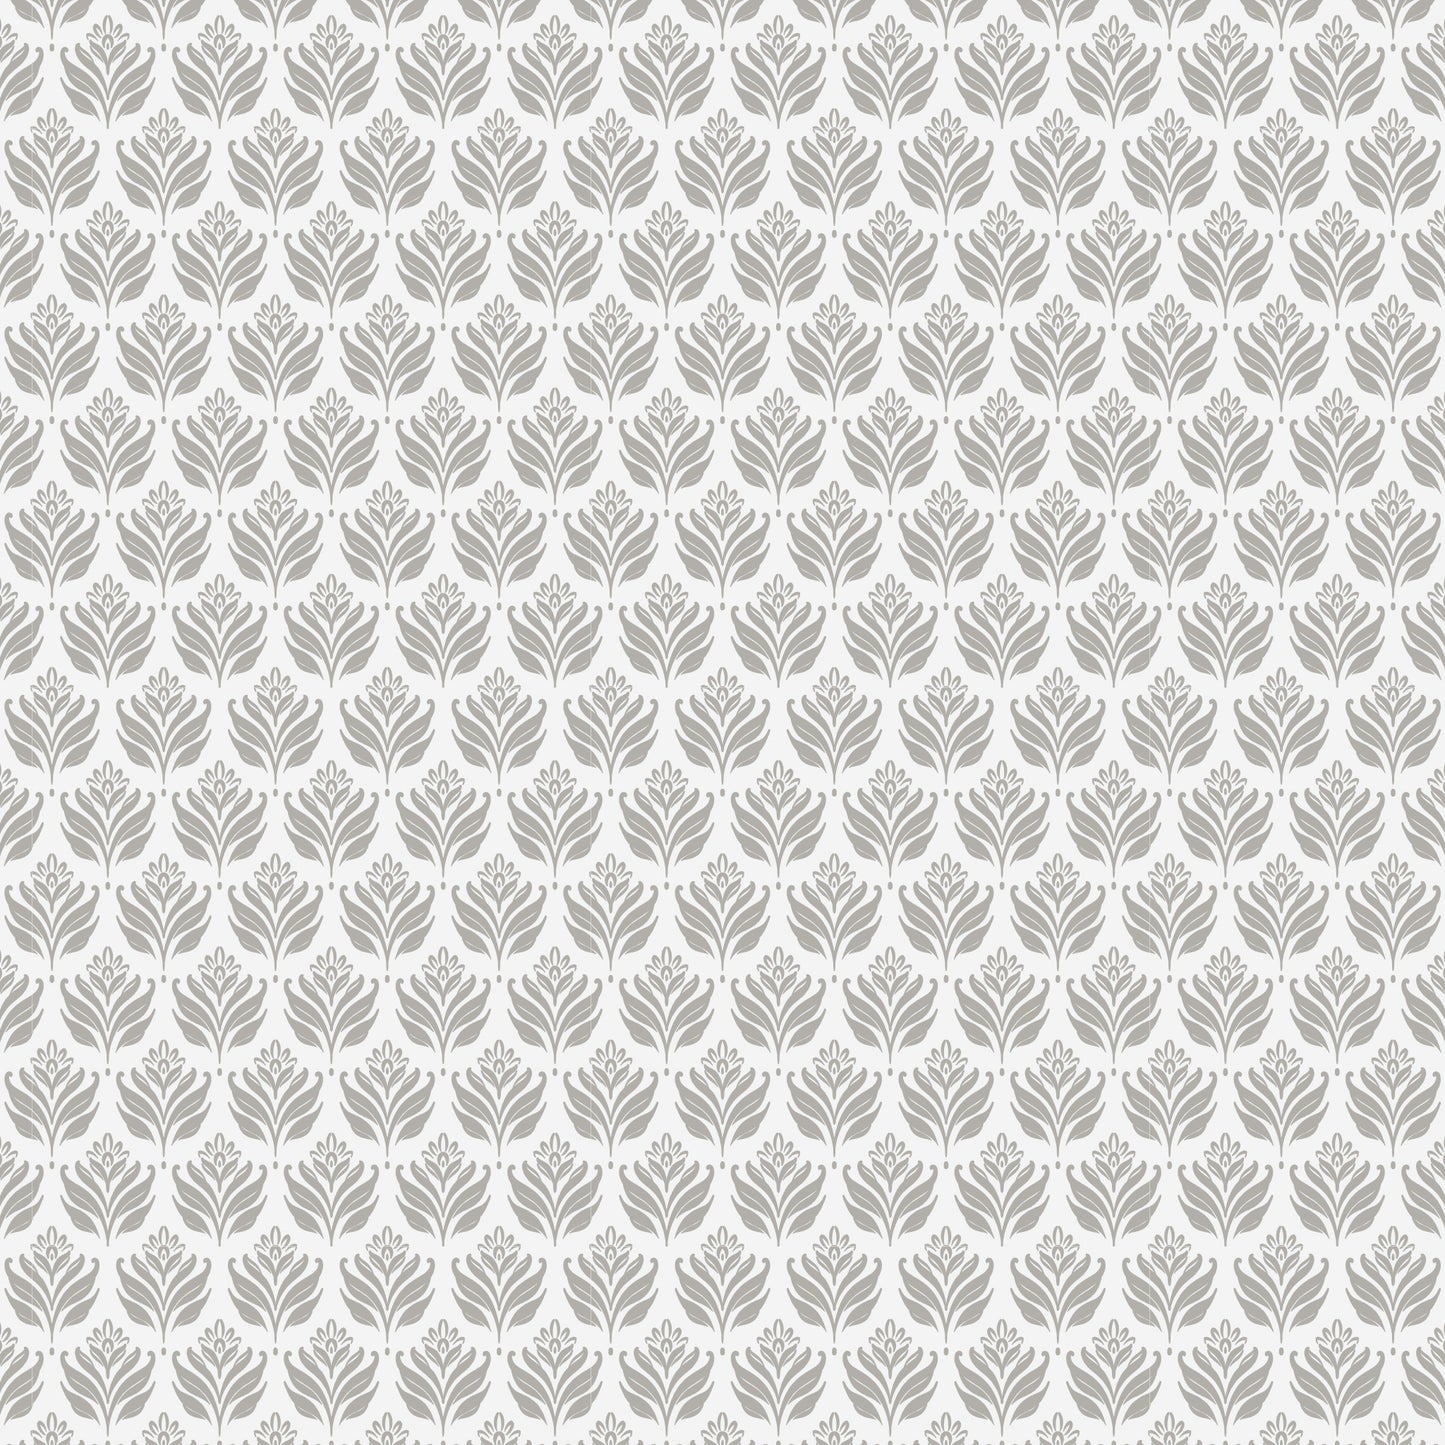 Introducing our Elegant Leaves Wallpaper in Pearl. These subtle leaves add a touch of sophistication to any space. Elevate your room with our premium wallpaper, designed for those with refined taste